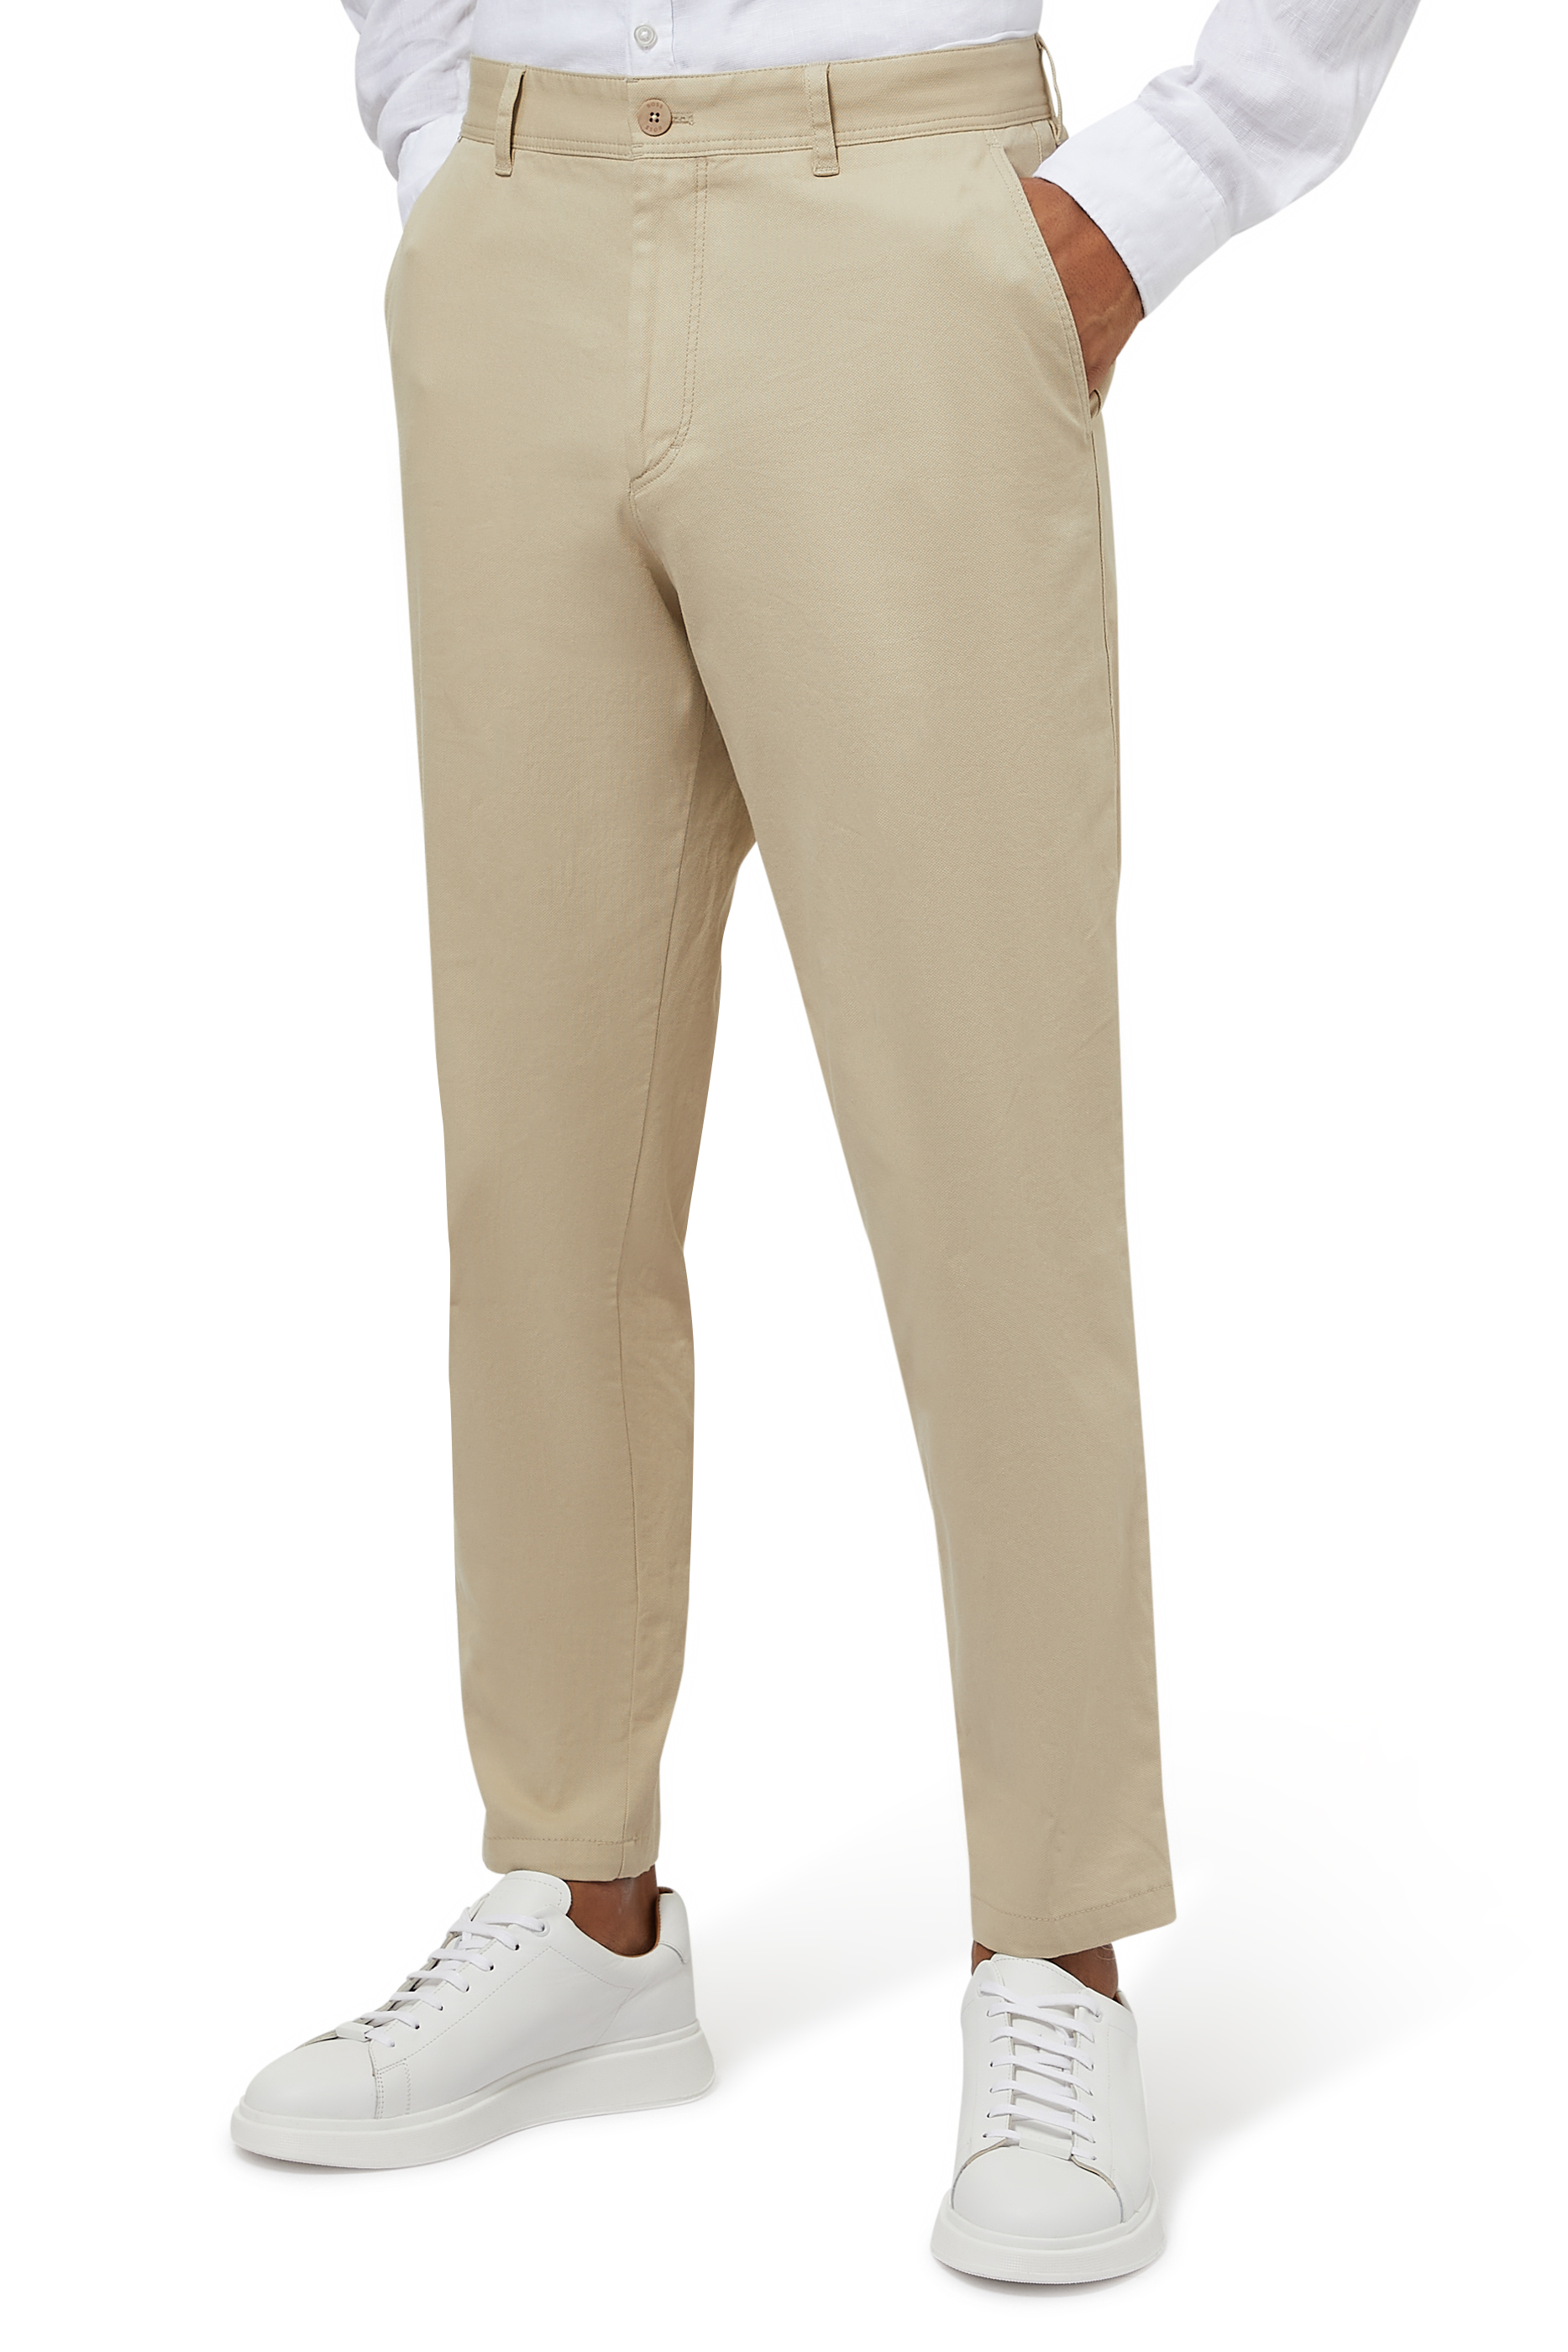 Buy Boss Perin Tapered-Fit Pants for Mens | Bloomingdale's Kuwait